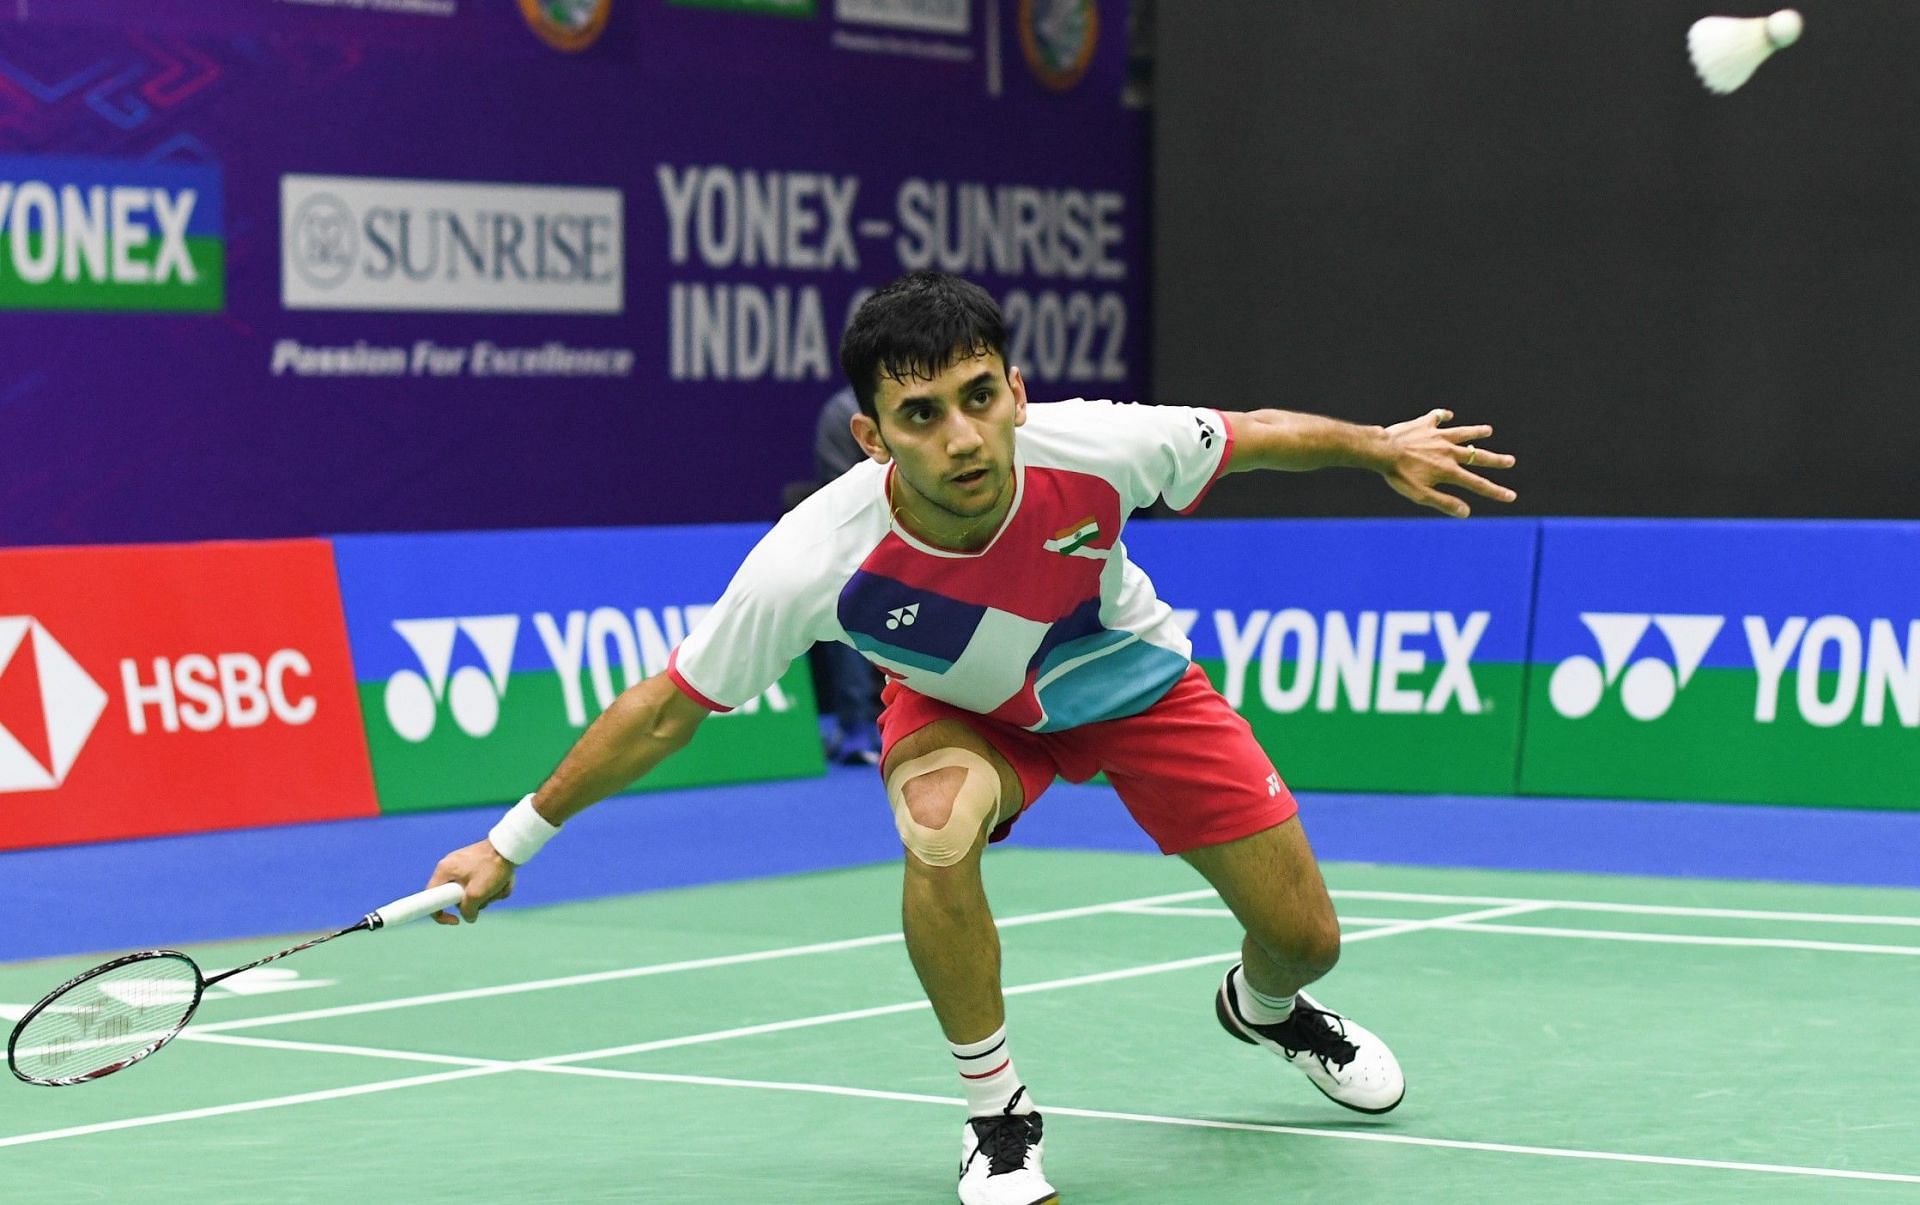 World No. 10 Lakshya Sen will represent the Indian team for the first time in the Commonwealth Games. (Pic credit: BAI)